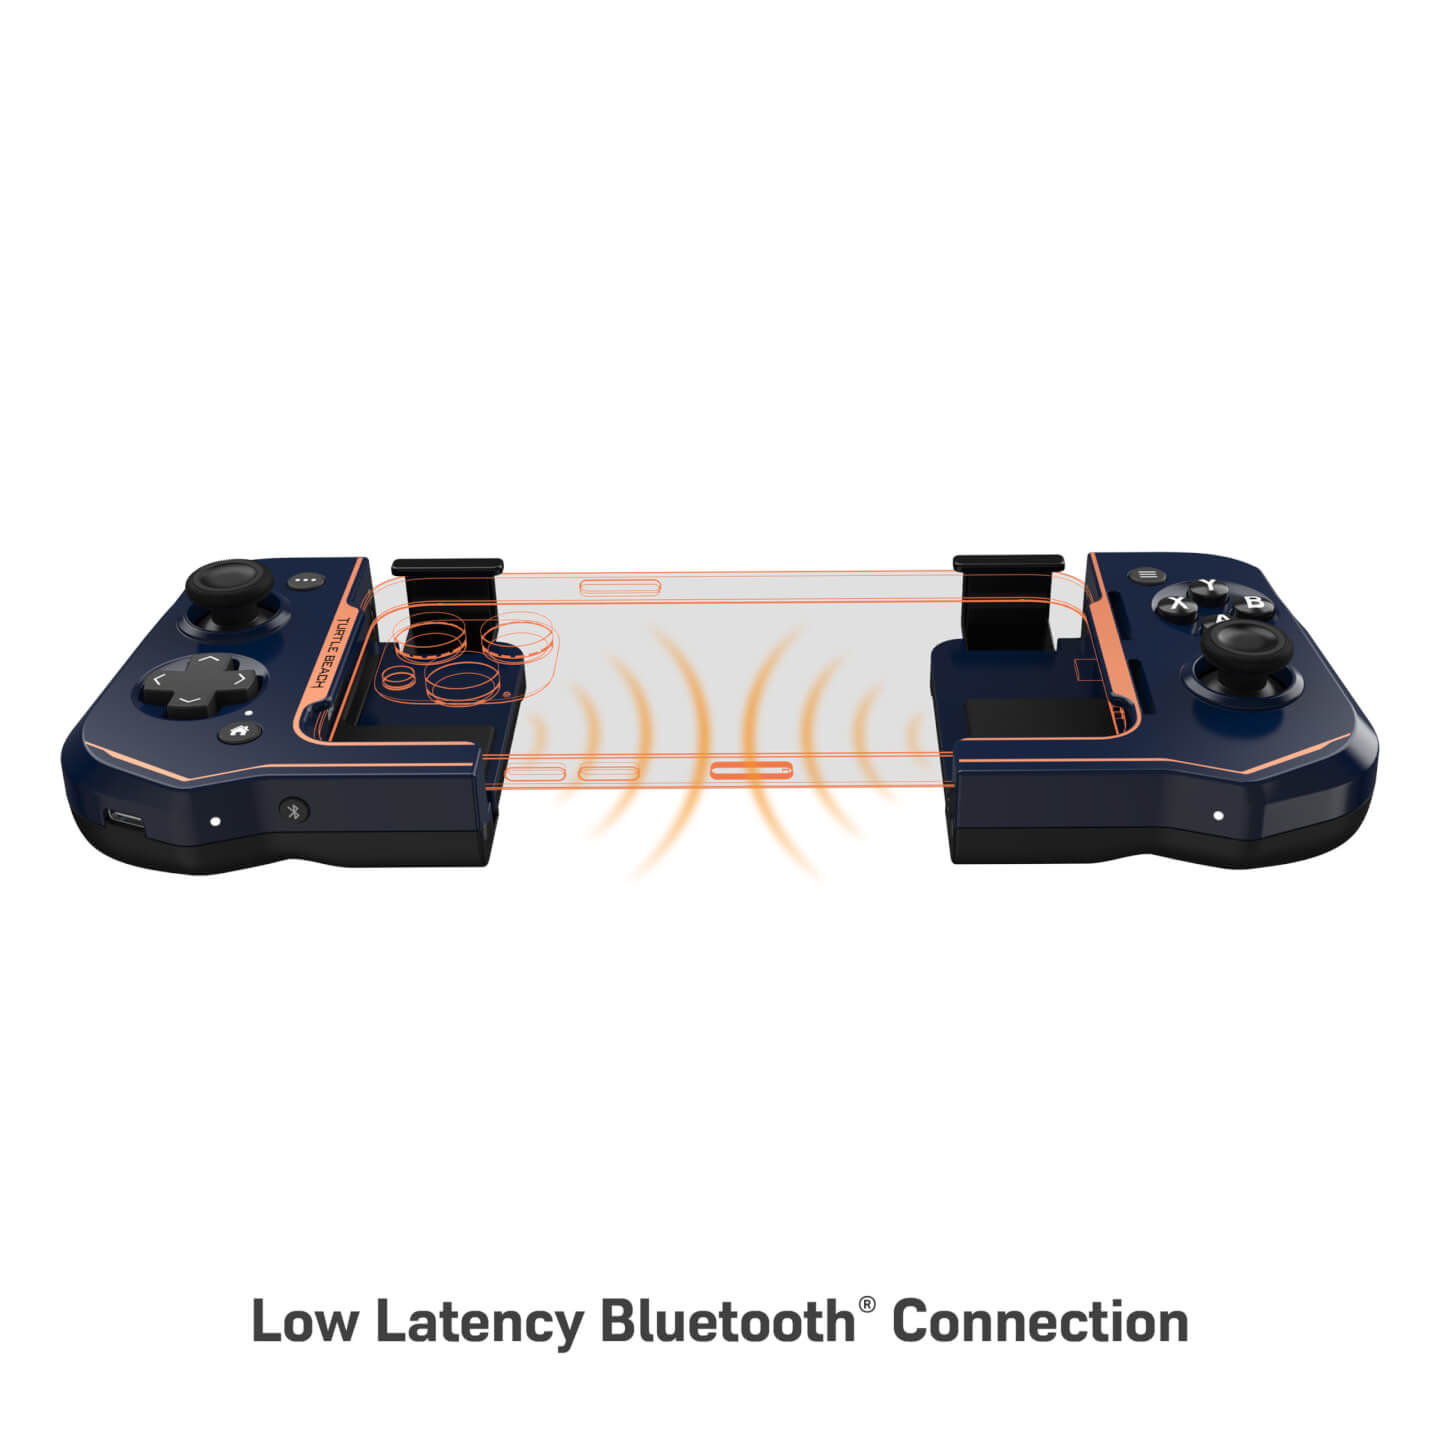 turtle beach atom controller ios cobalt detail image 2 low latency bluetooth connection english (1)